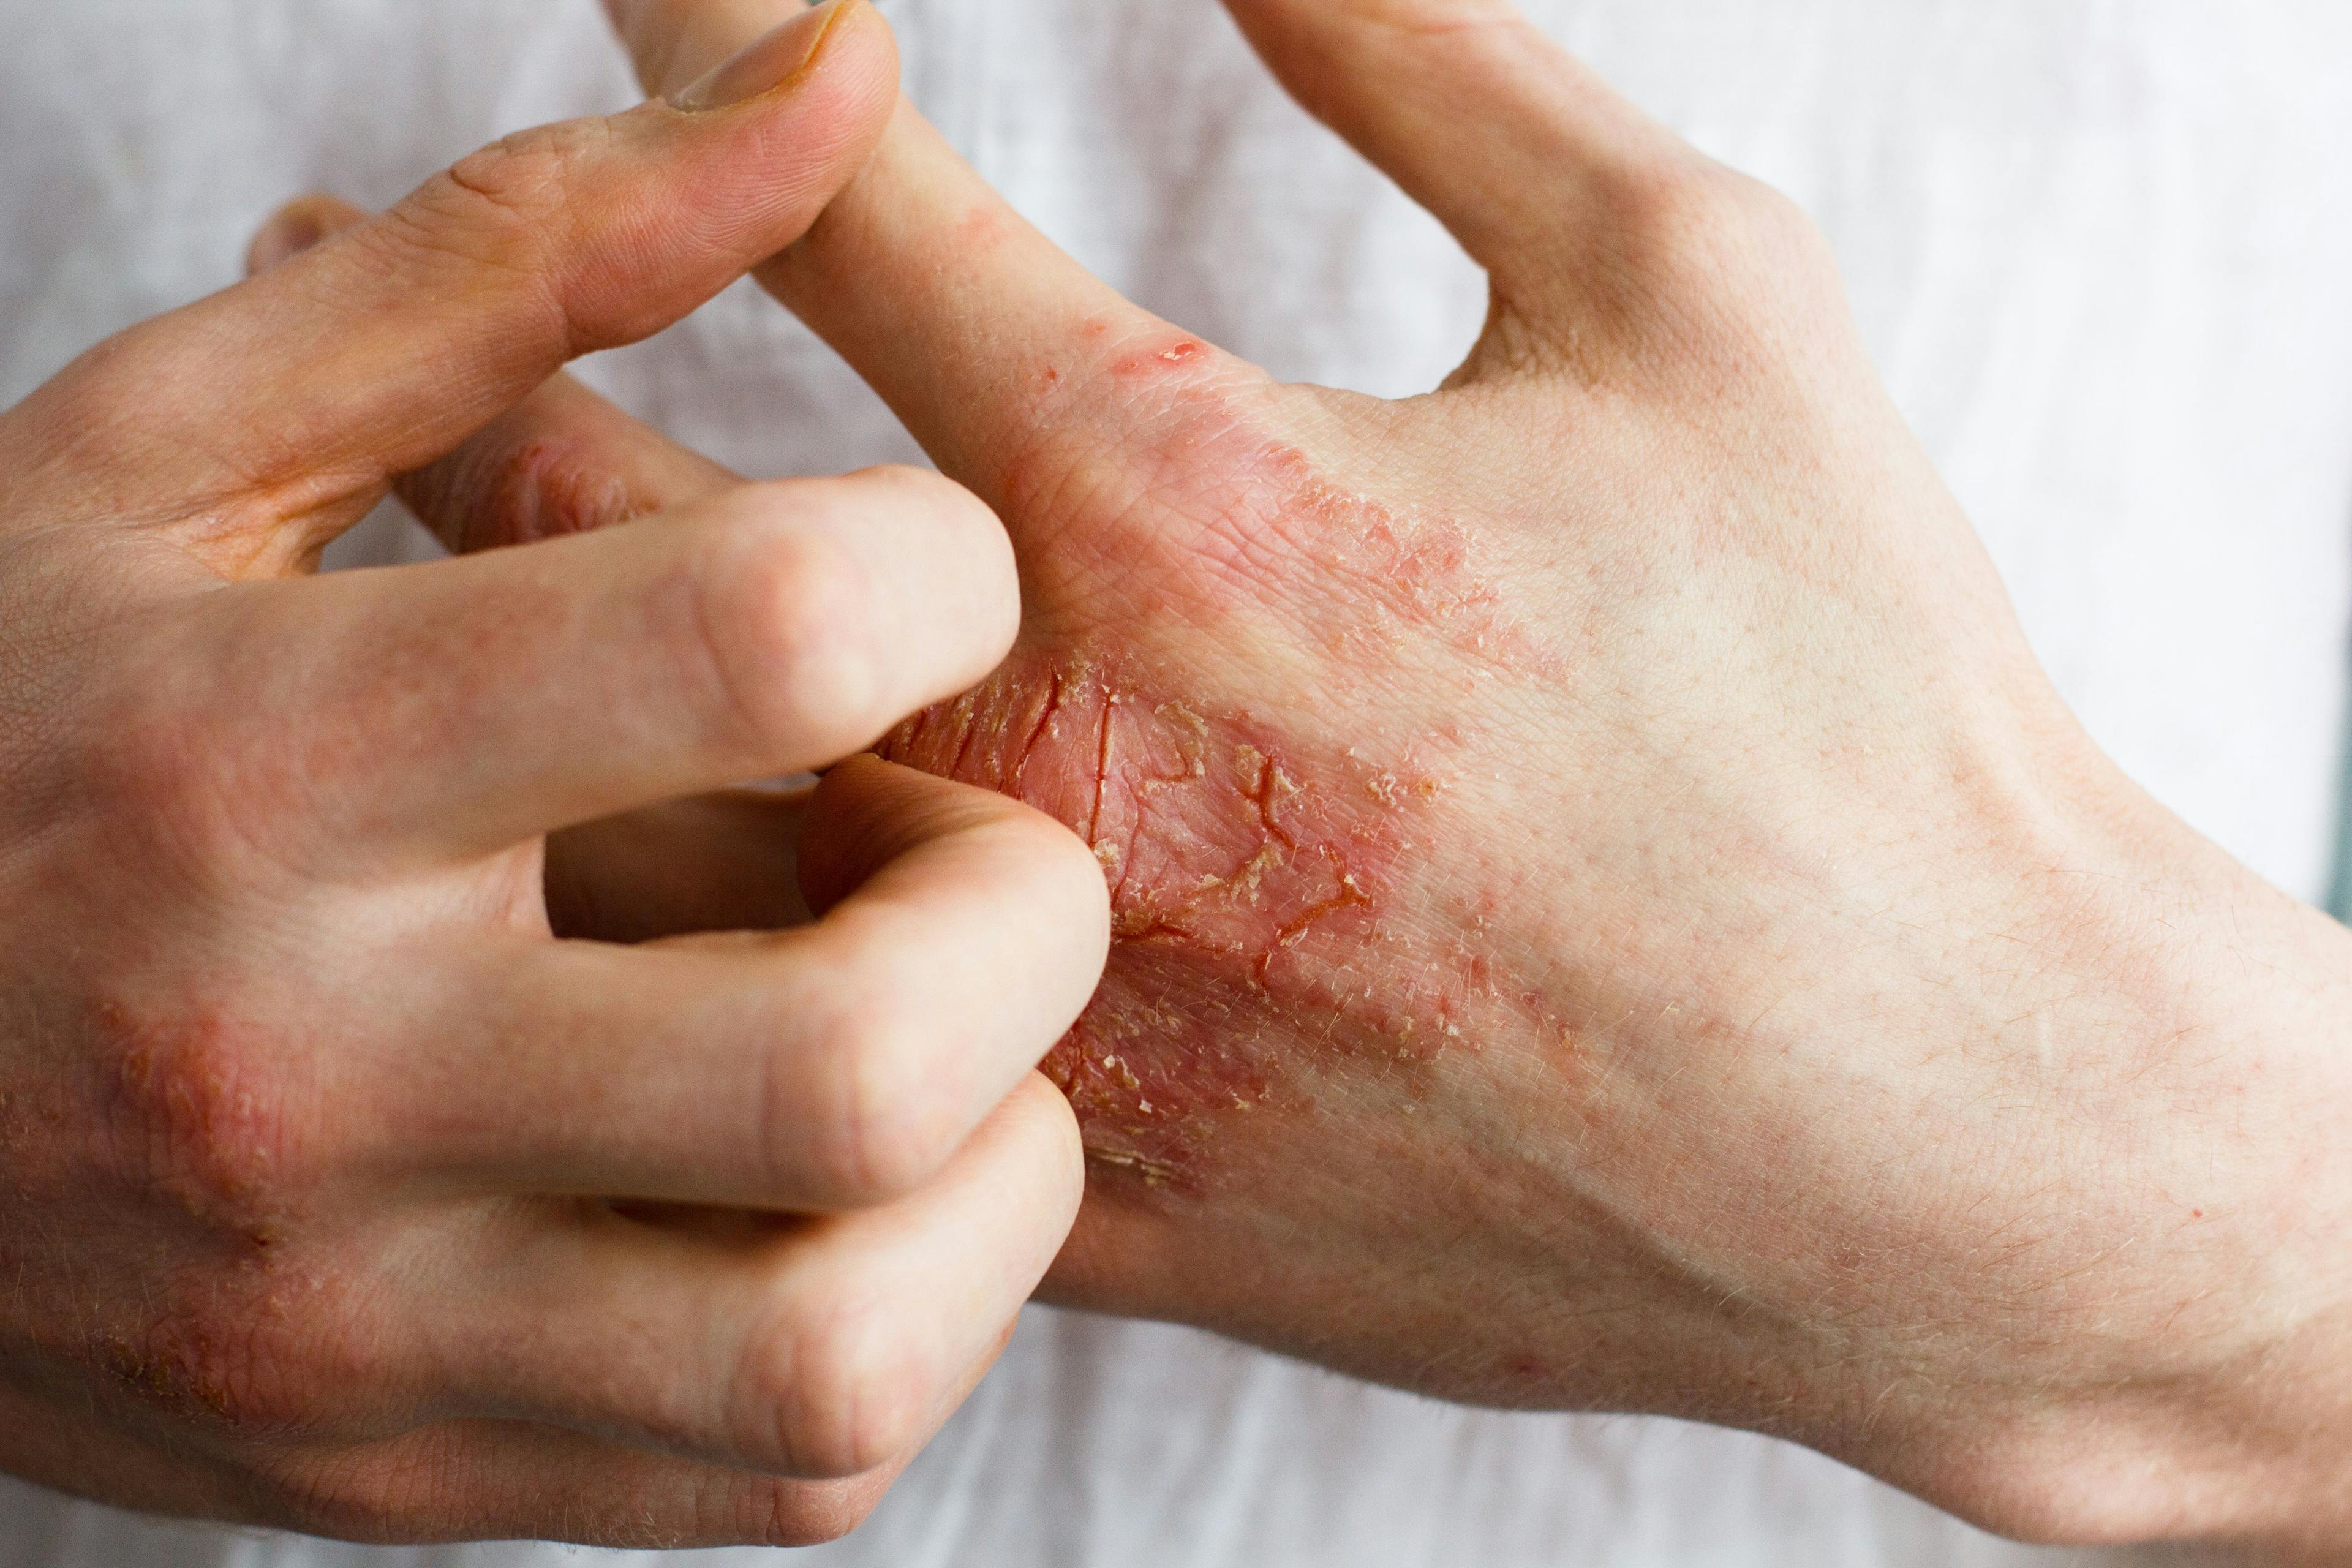 New Investigational Topical Peptide Offers Promising Eczema Treatment